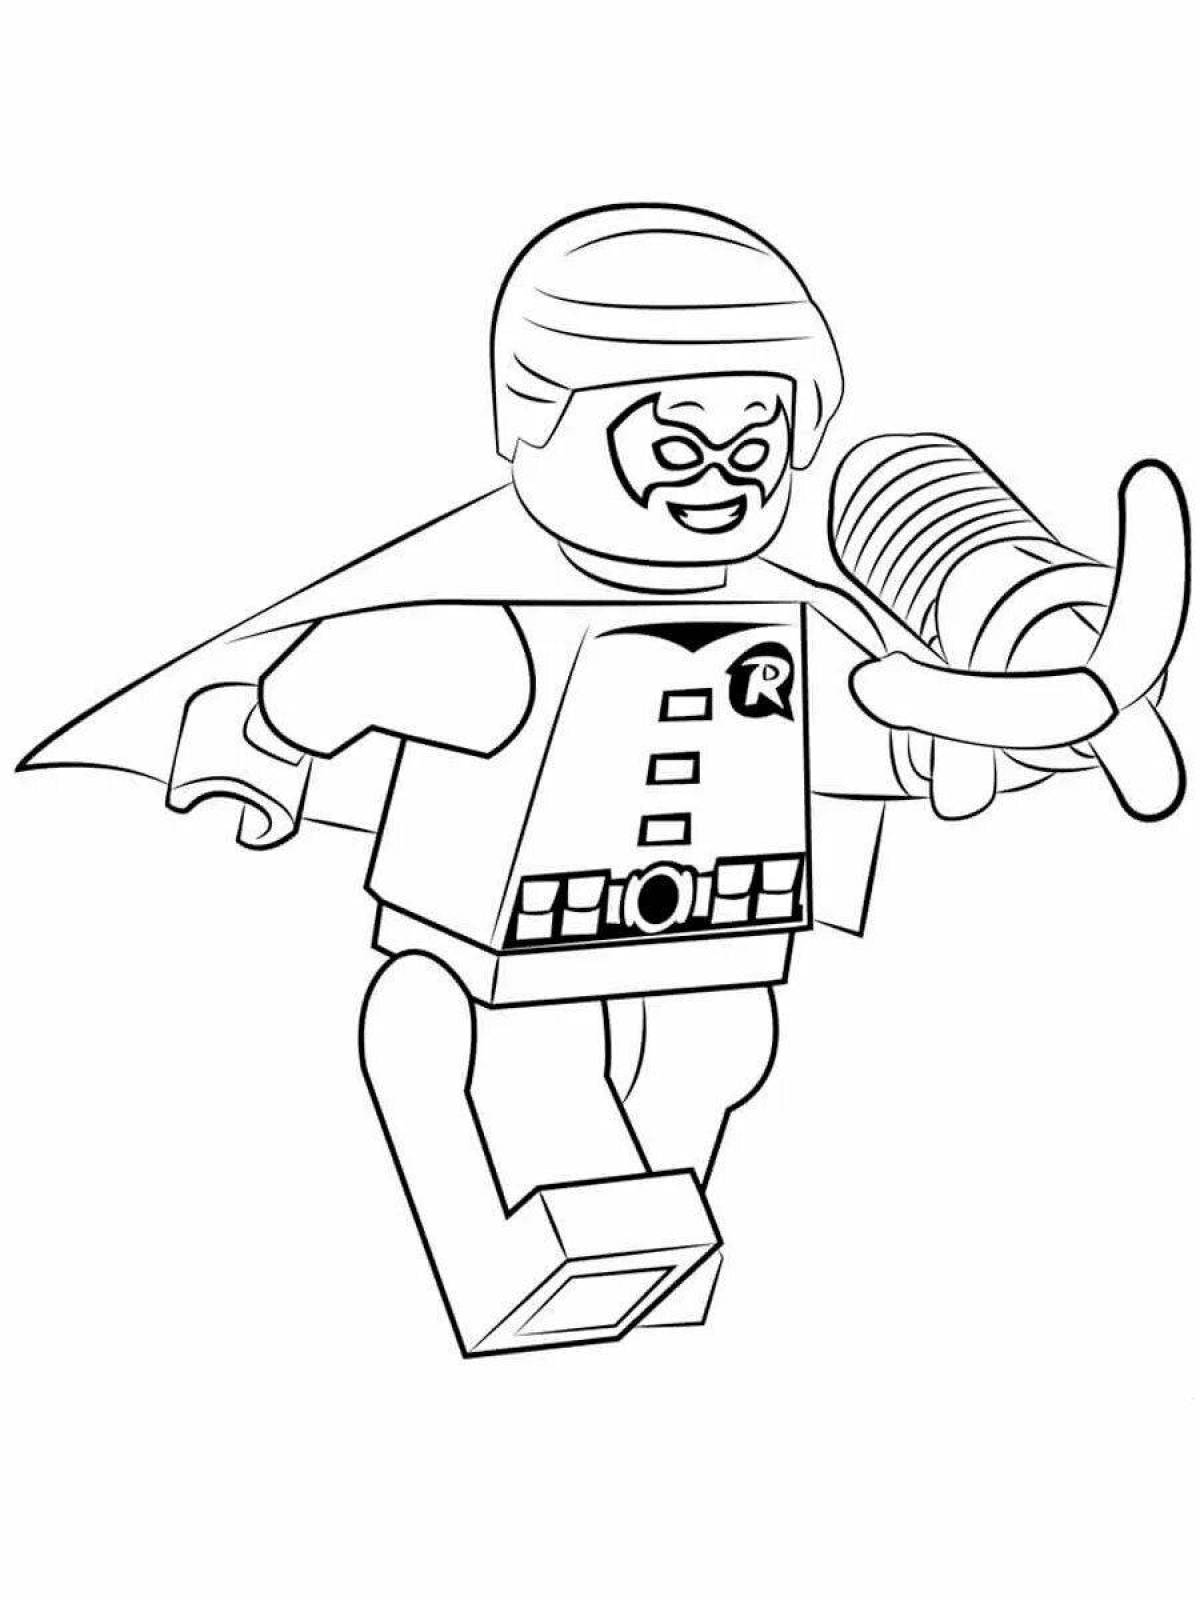 Interesting lego flash coloring page